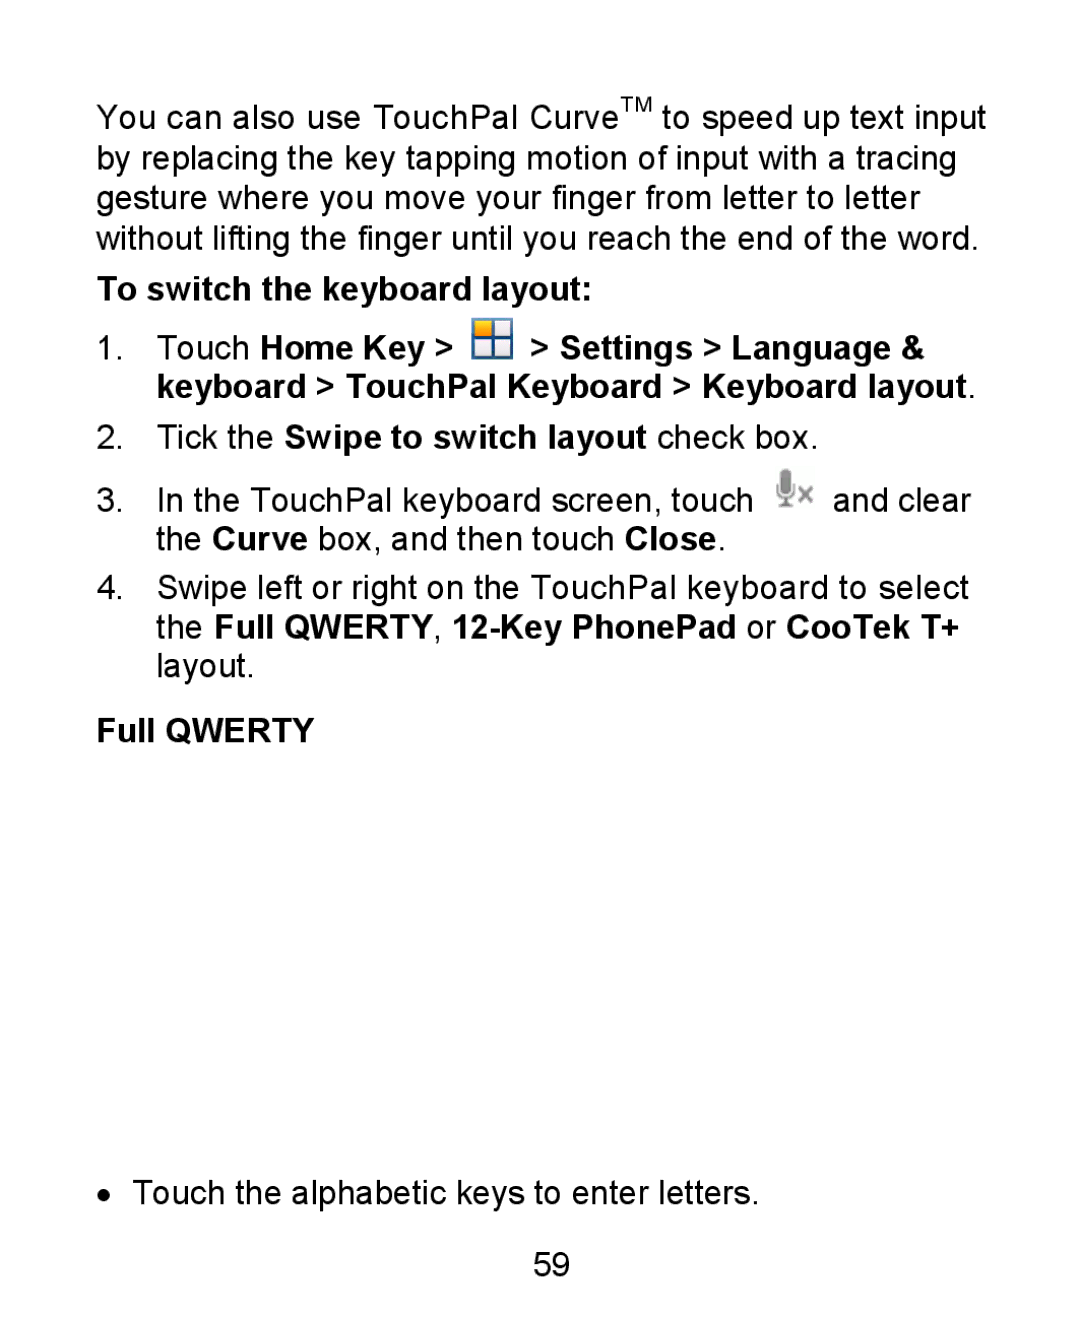 ZTE KIS user manual To switch the keyboard layout, Tick the Swipe to switch layout check box, Full Qwerty 